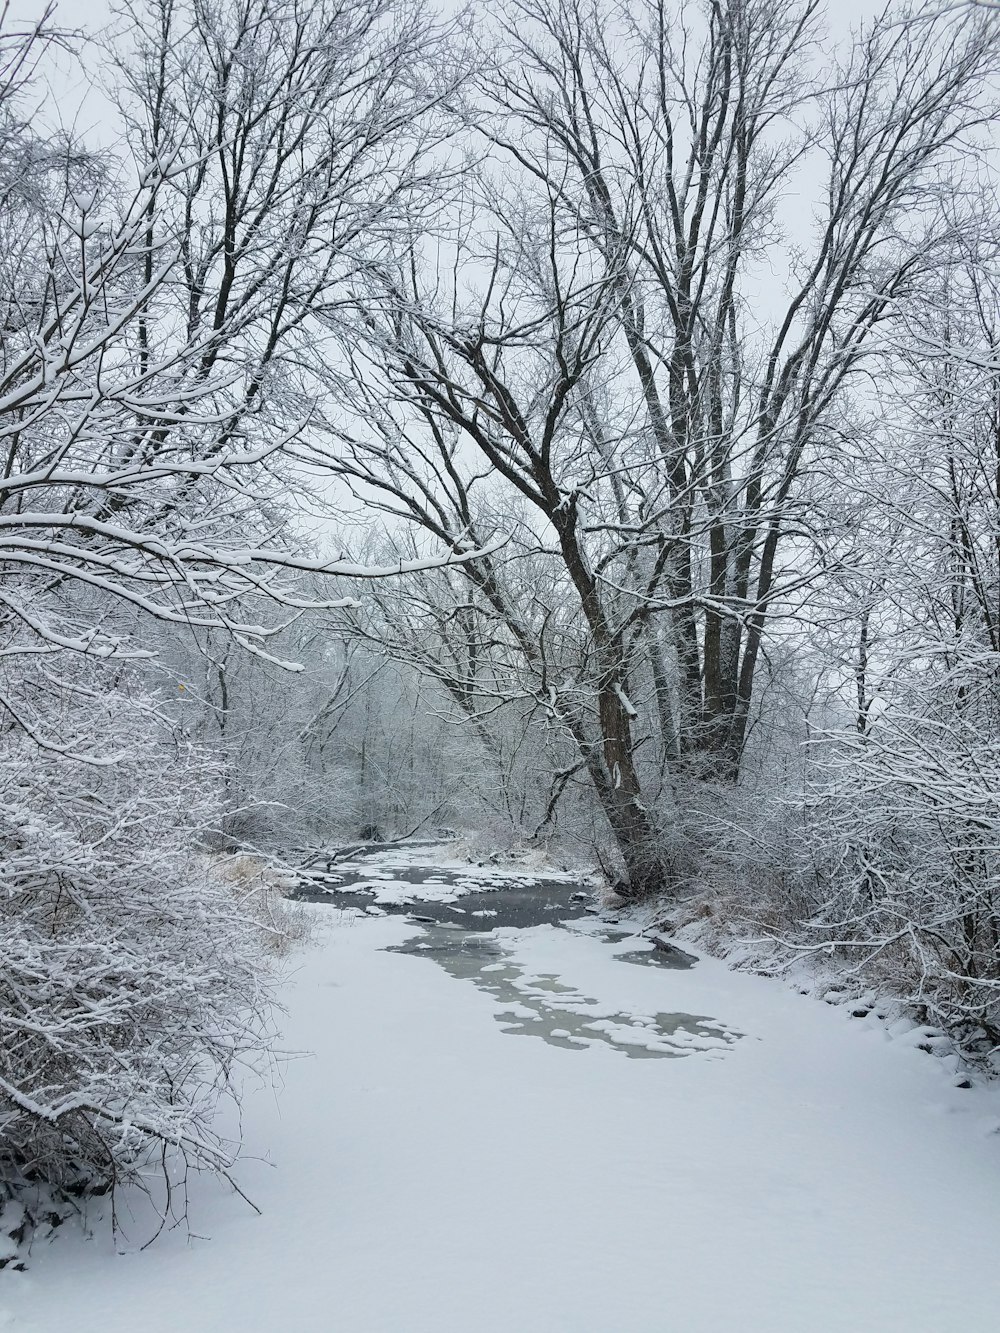 a snow covered river surrounded by trees and bushes